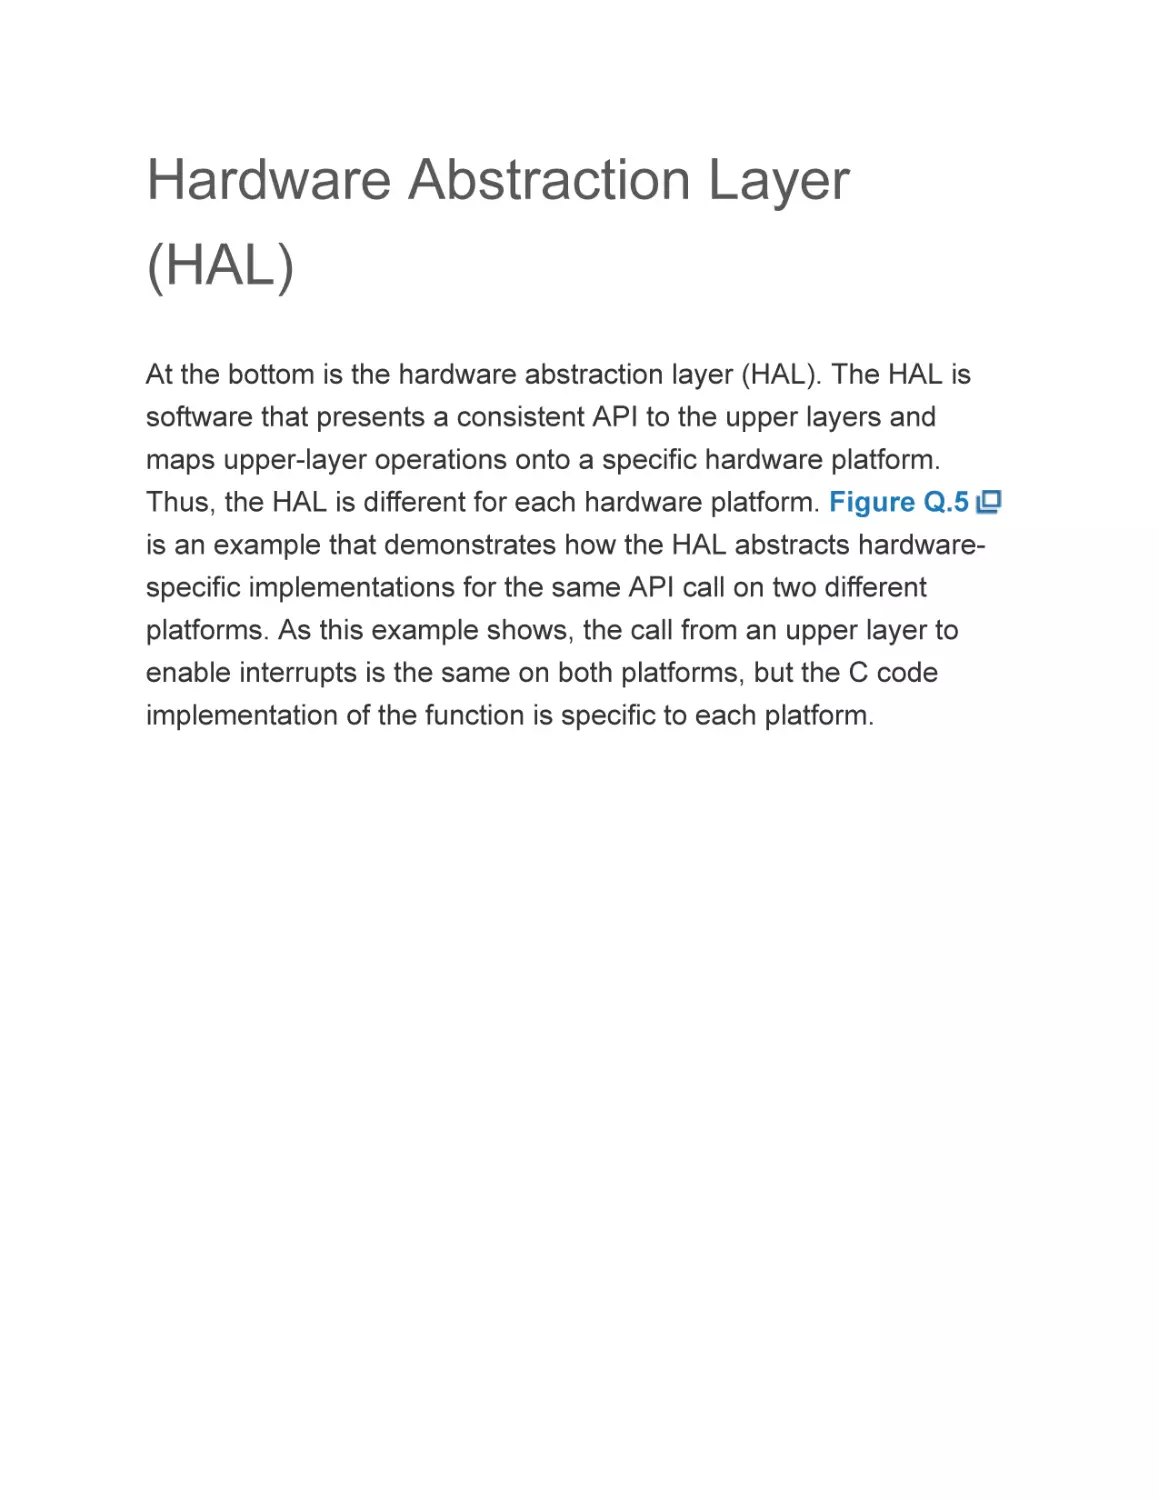 Hardware Abstraction Layer (HAL)